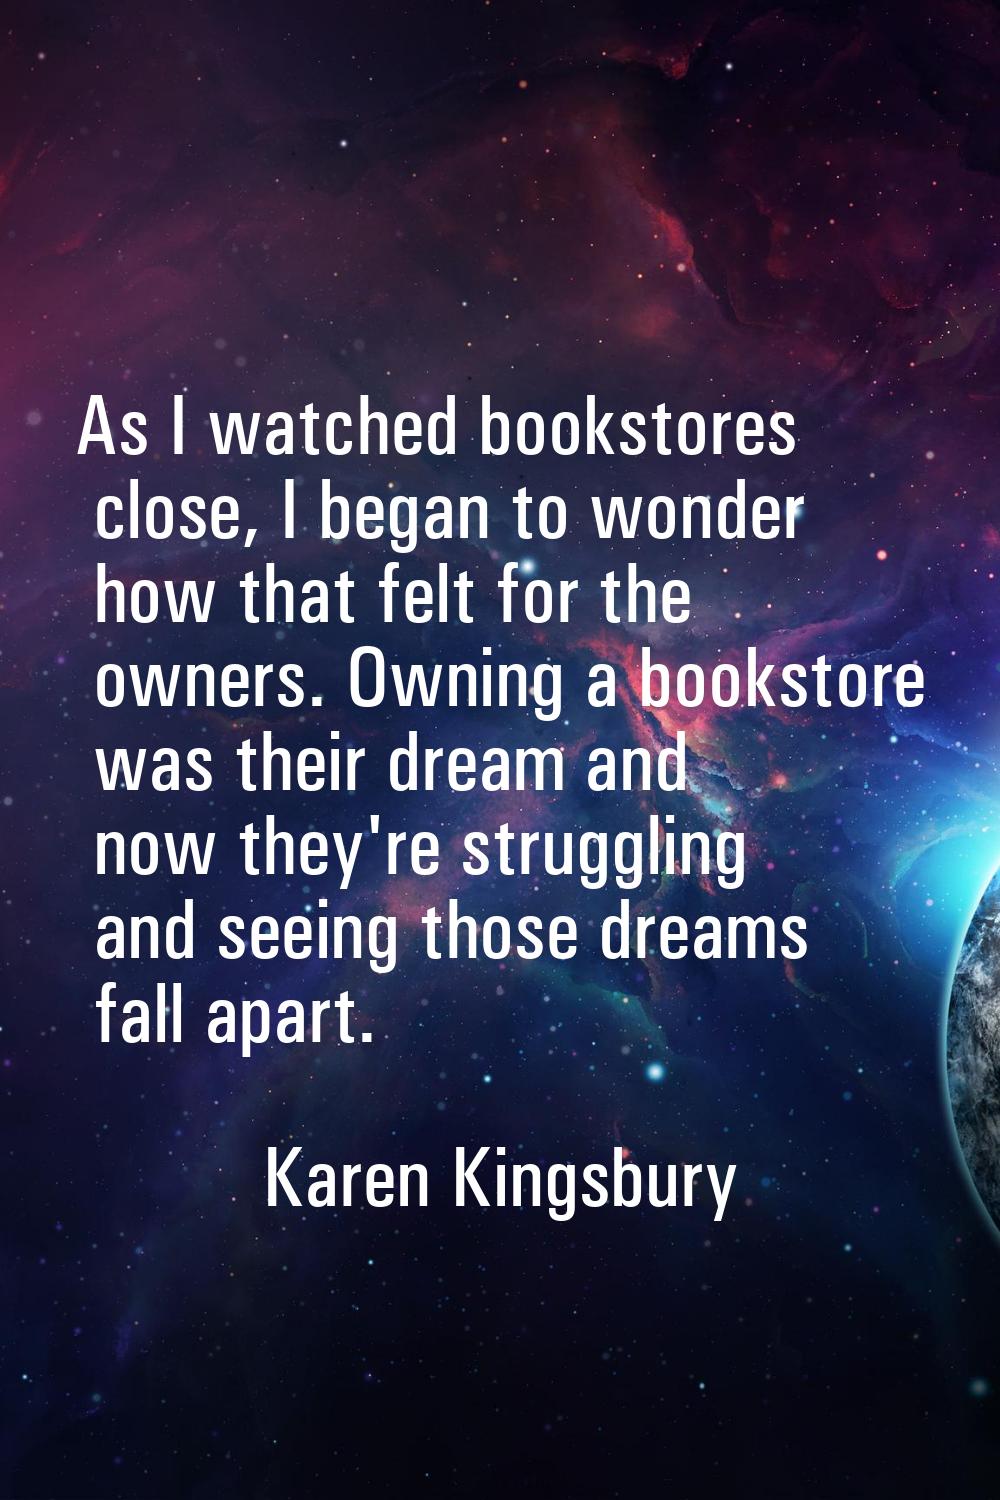 As I watched bookstores close, I began to wonder how that felt for the owners. Owning a bookstore w